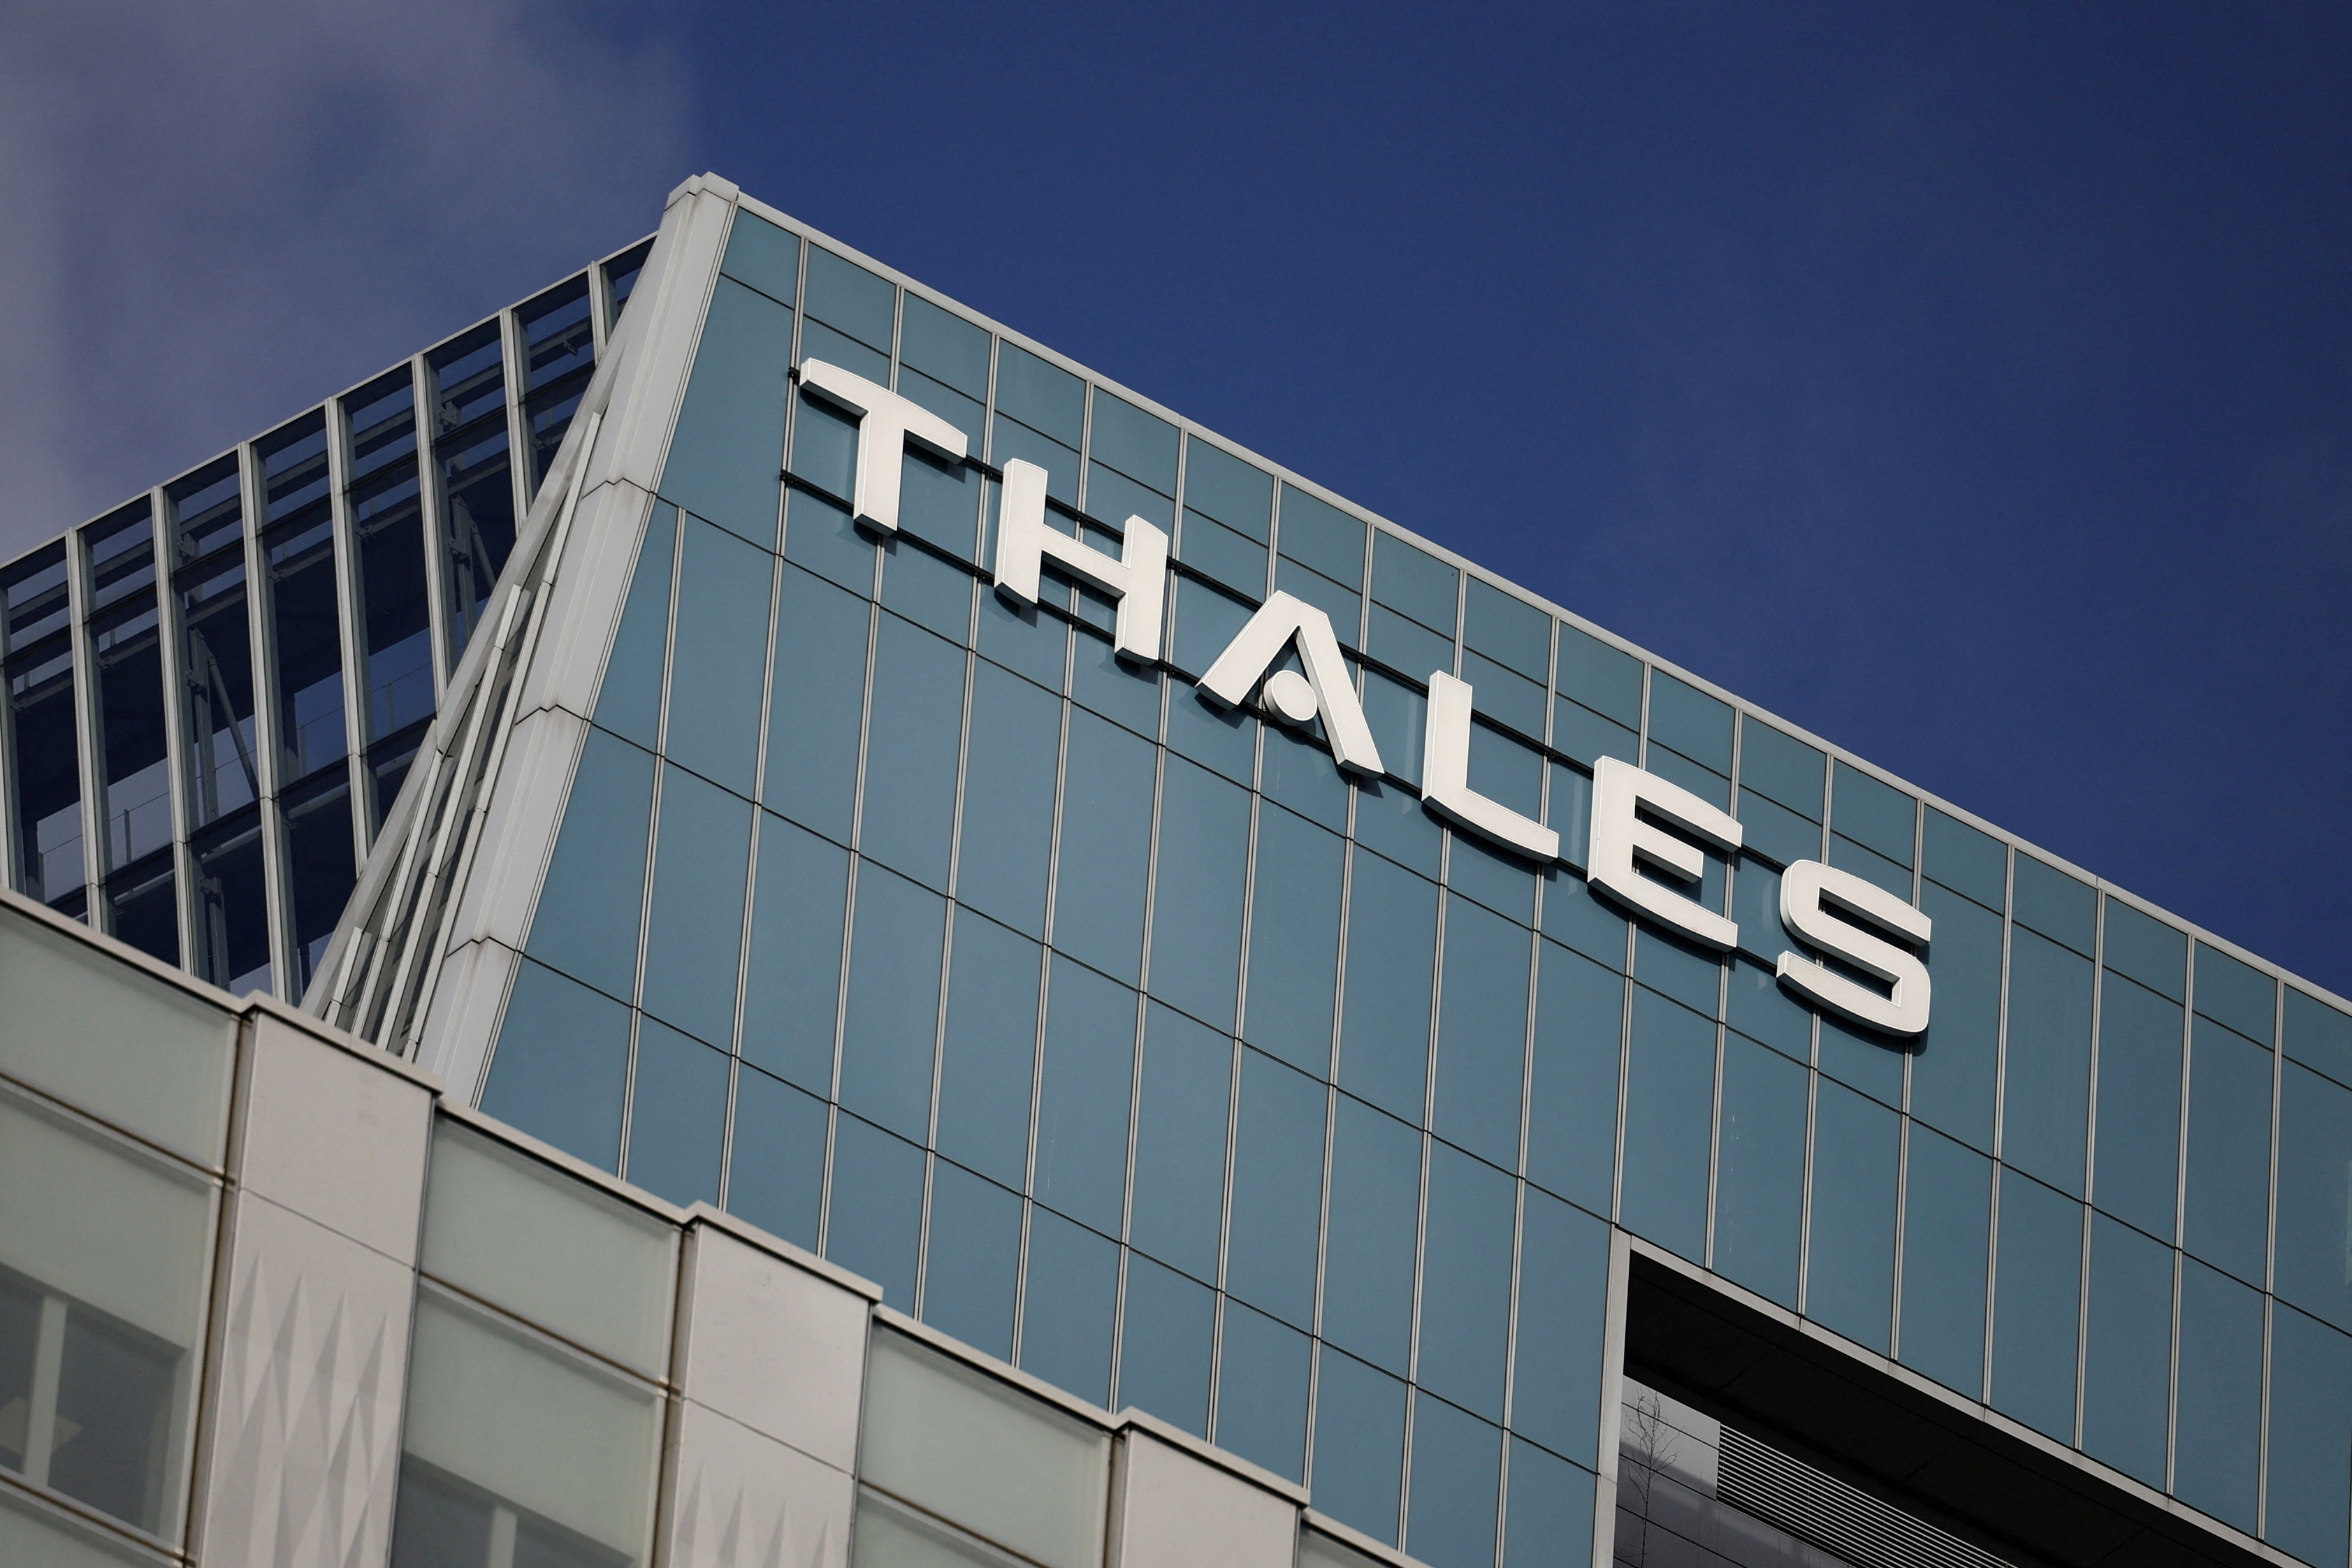 Thales confirms hackers have released its data on the dark web